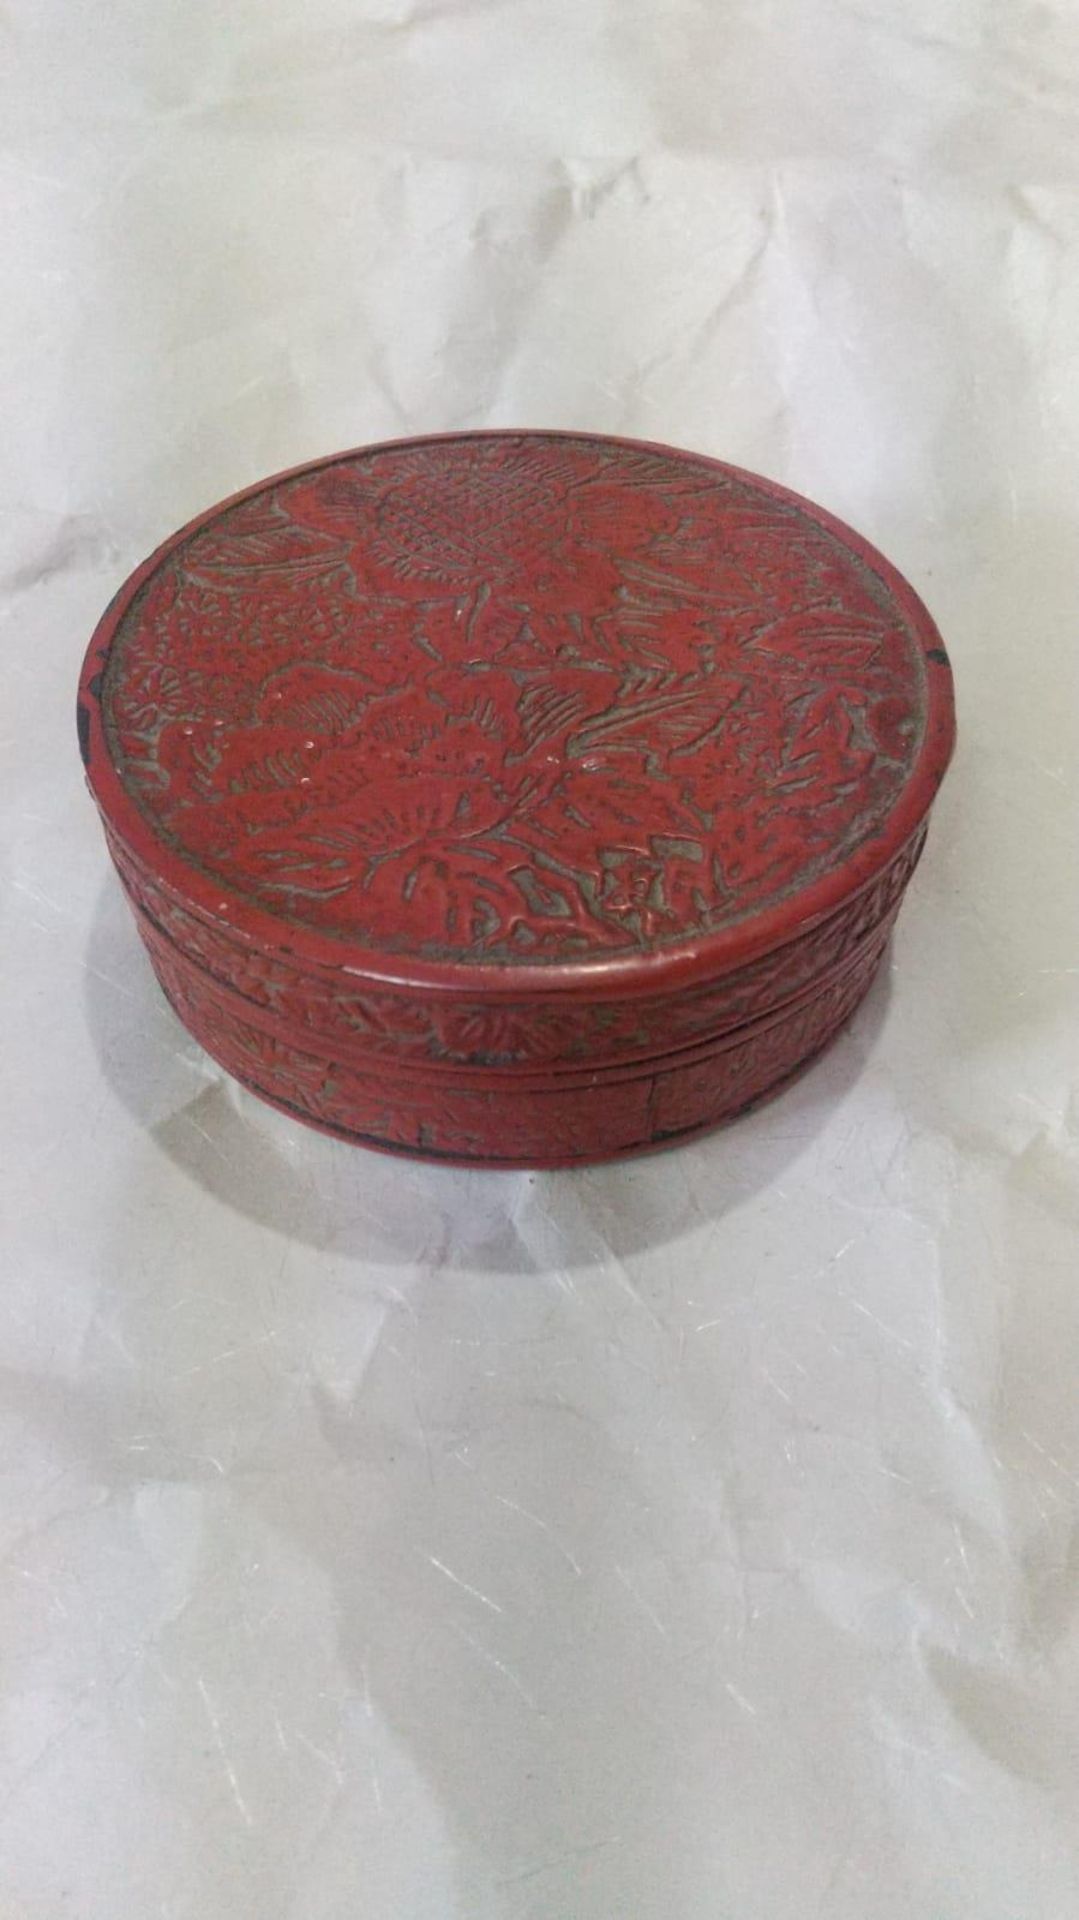 Antique 1600-1868 Cinnabar red lacquer box. Antique red Cinnabar red lacquer Buddhist incense box. - Image 3 of 5